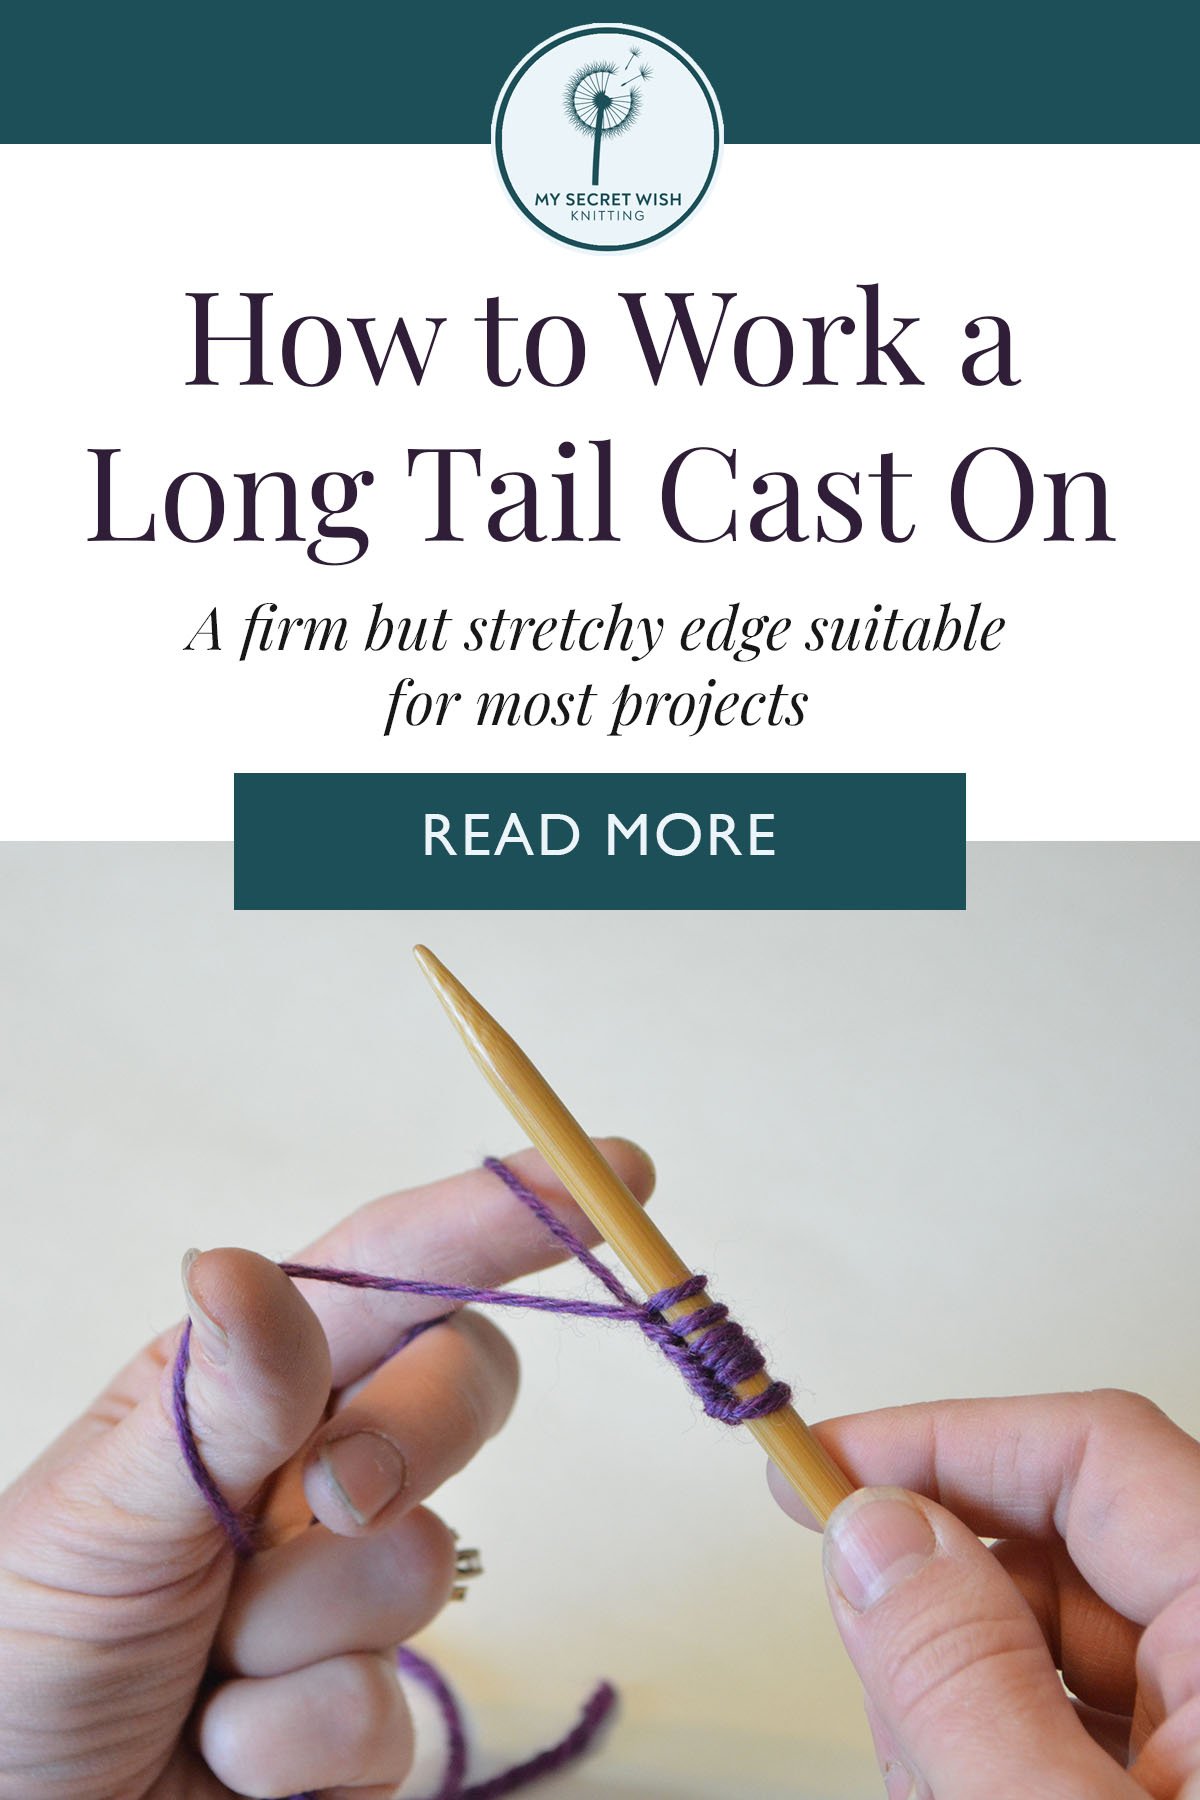 Knitting for Beginners: How to Cast on Knitting with a Long Tail Cast On